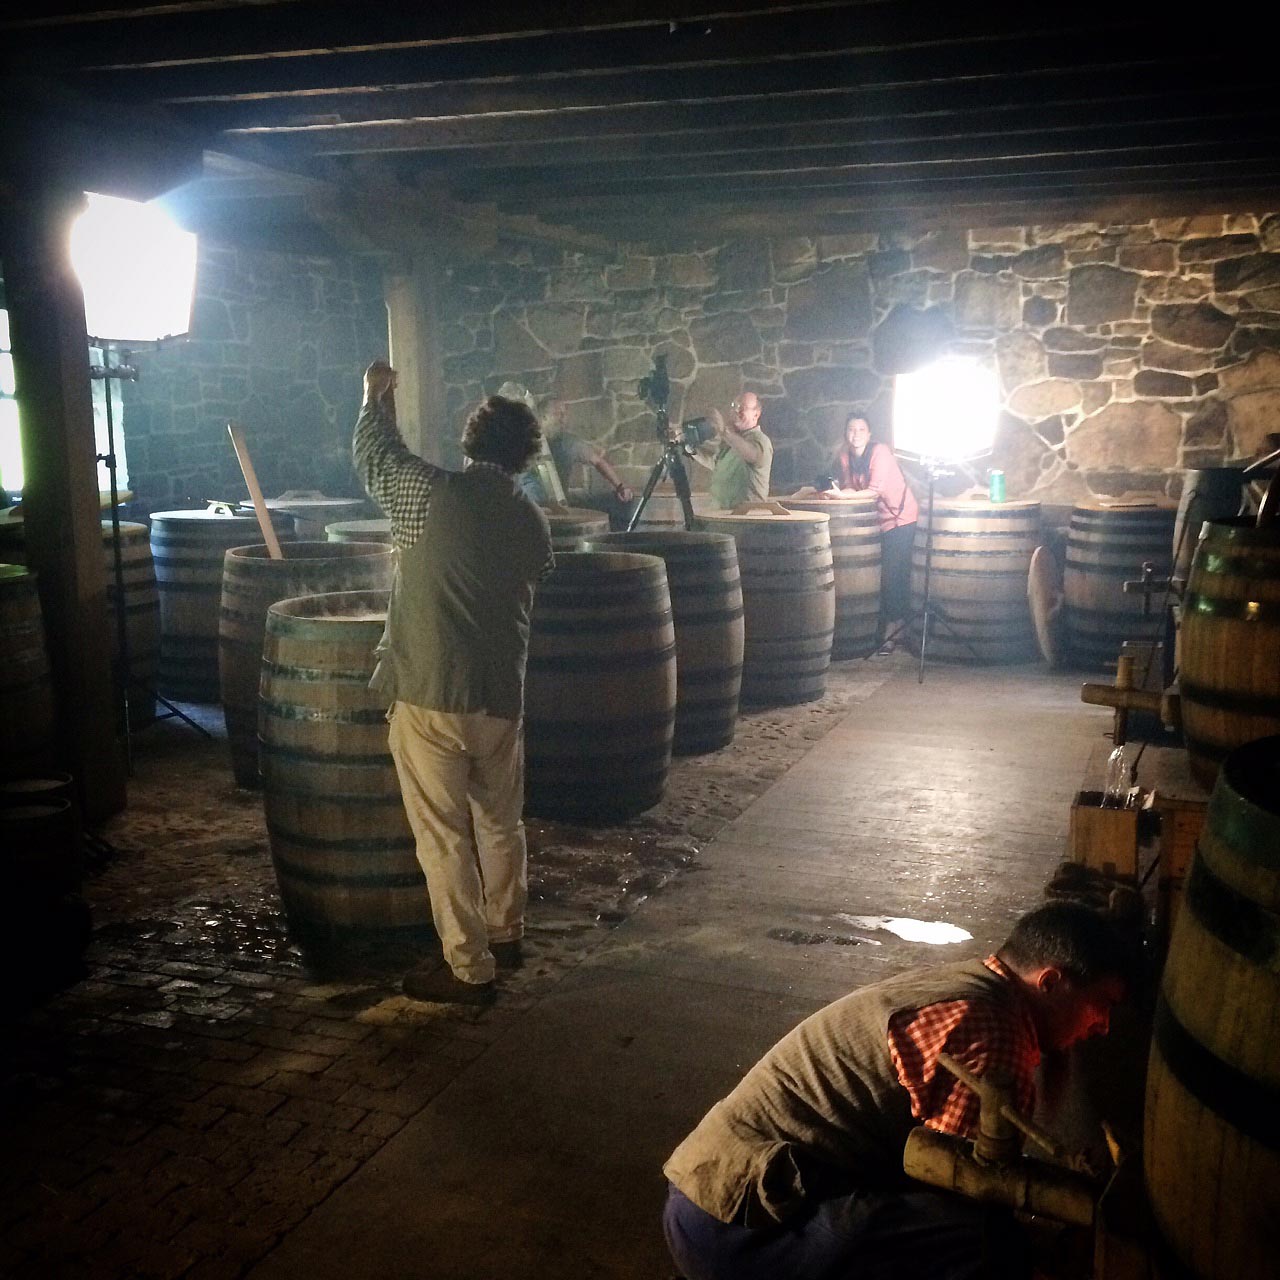 Me directing as I film b-roll in the Mount Distillery. This is Cameron's moment of interruption as seen in the film. Photo © Cameron Davidson. Mount Vernon, Va. June, 2016.